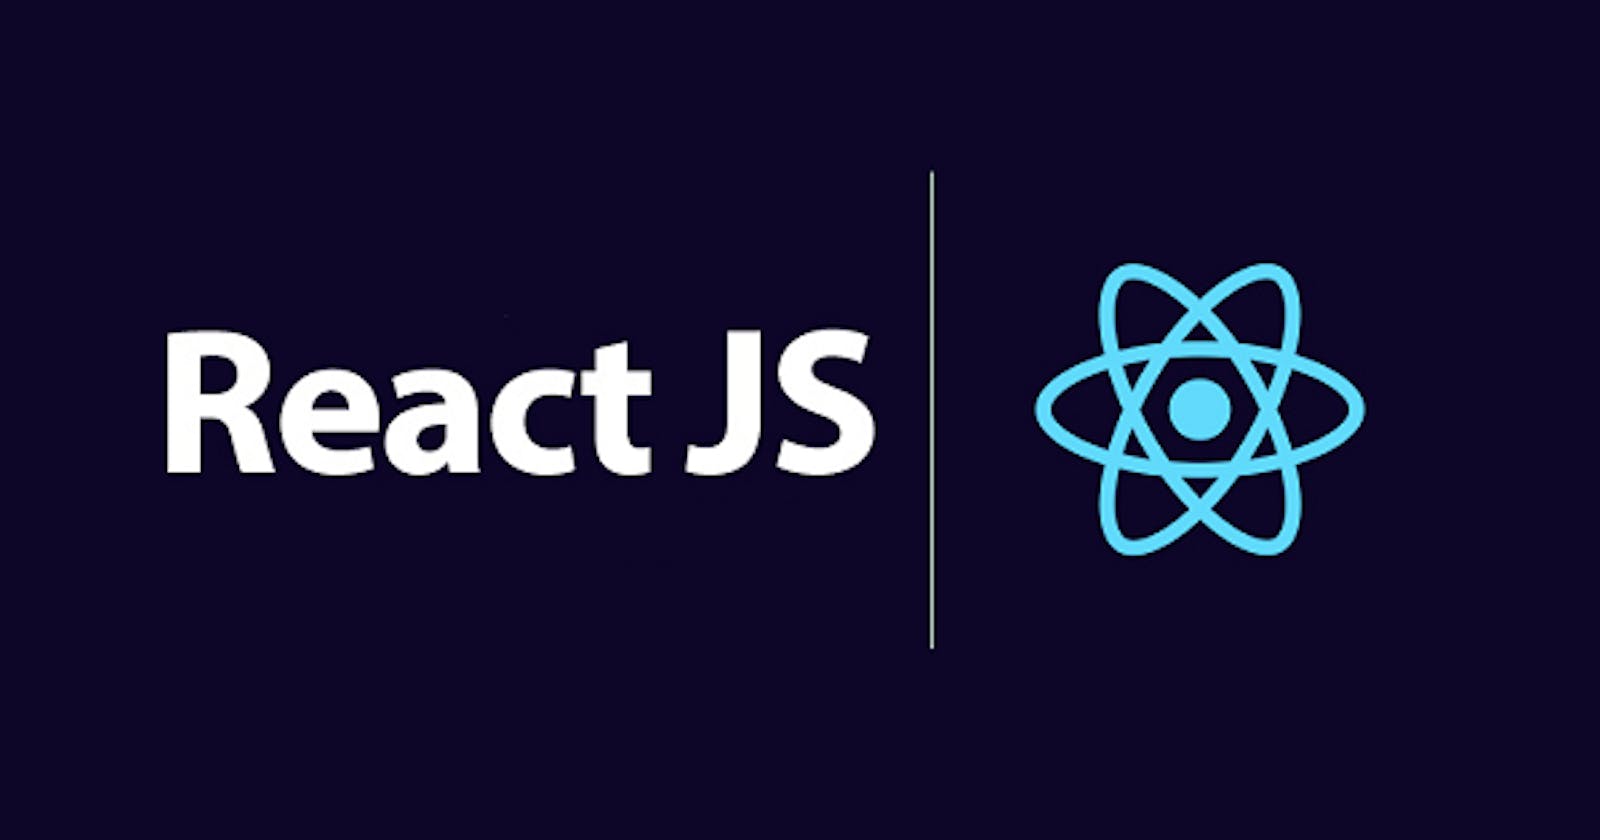 How to Build a Chatbot with React JS